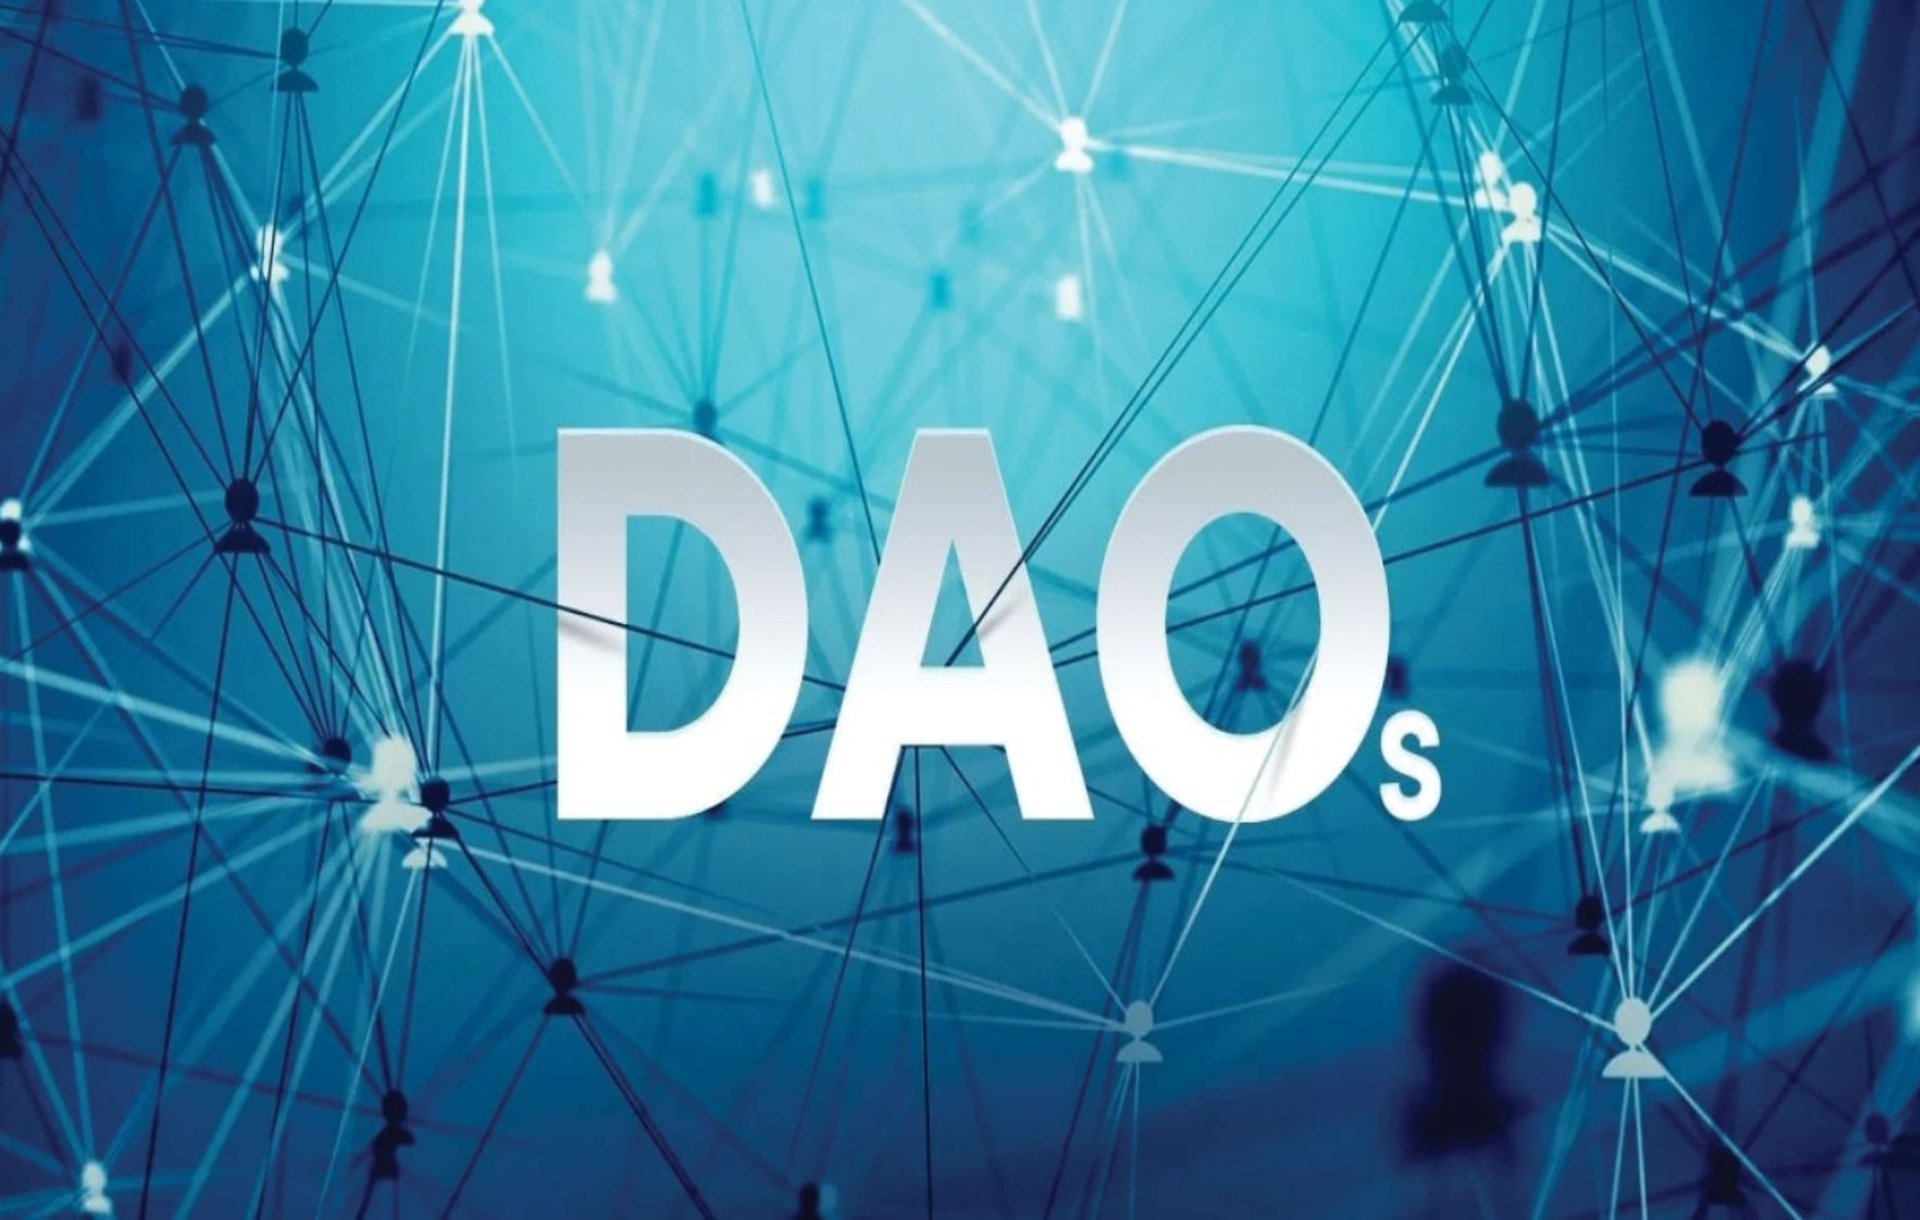 What do NBA, climate change or an art gallery have in common? DAO is the answer for this. In this article we explain briefly 6 interesting projects related to DAOs